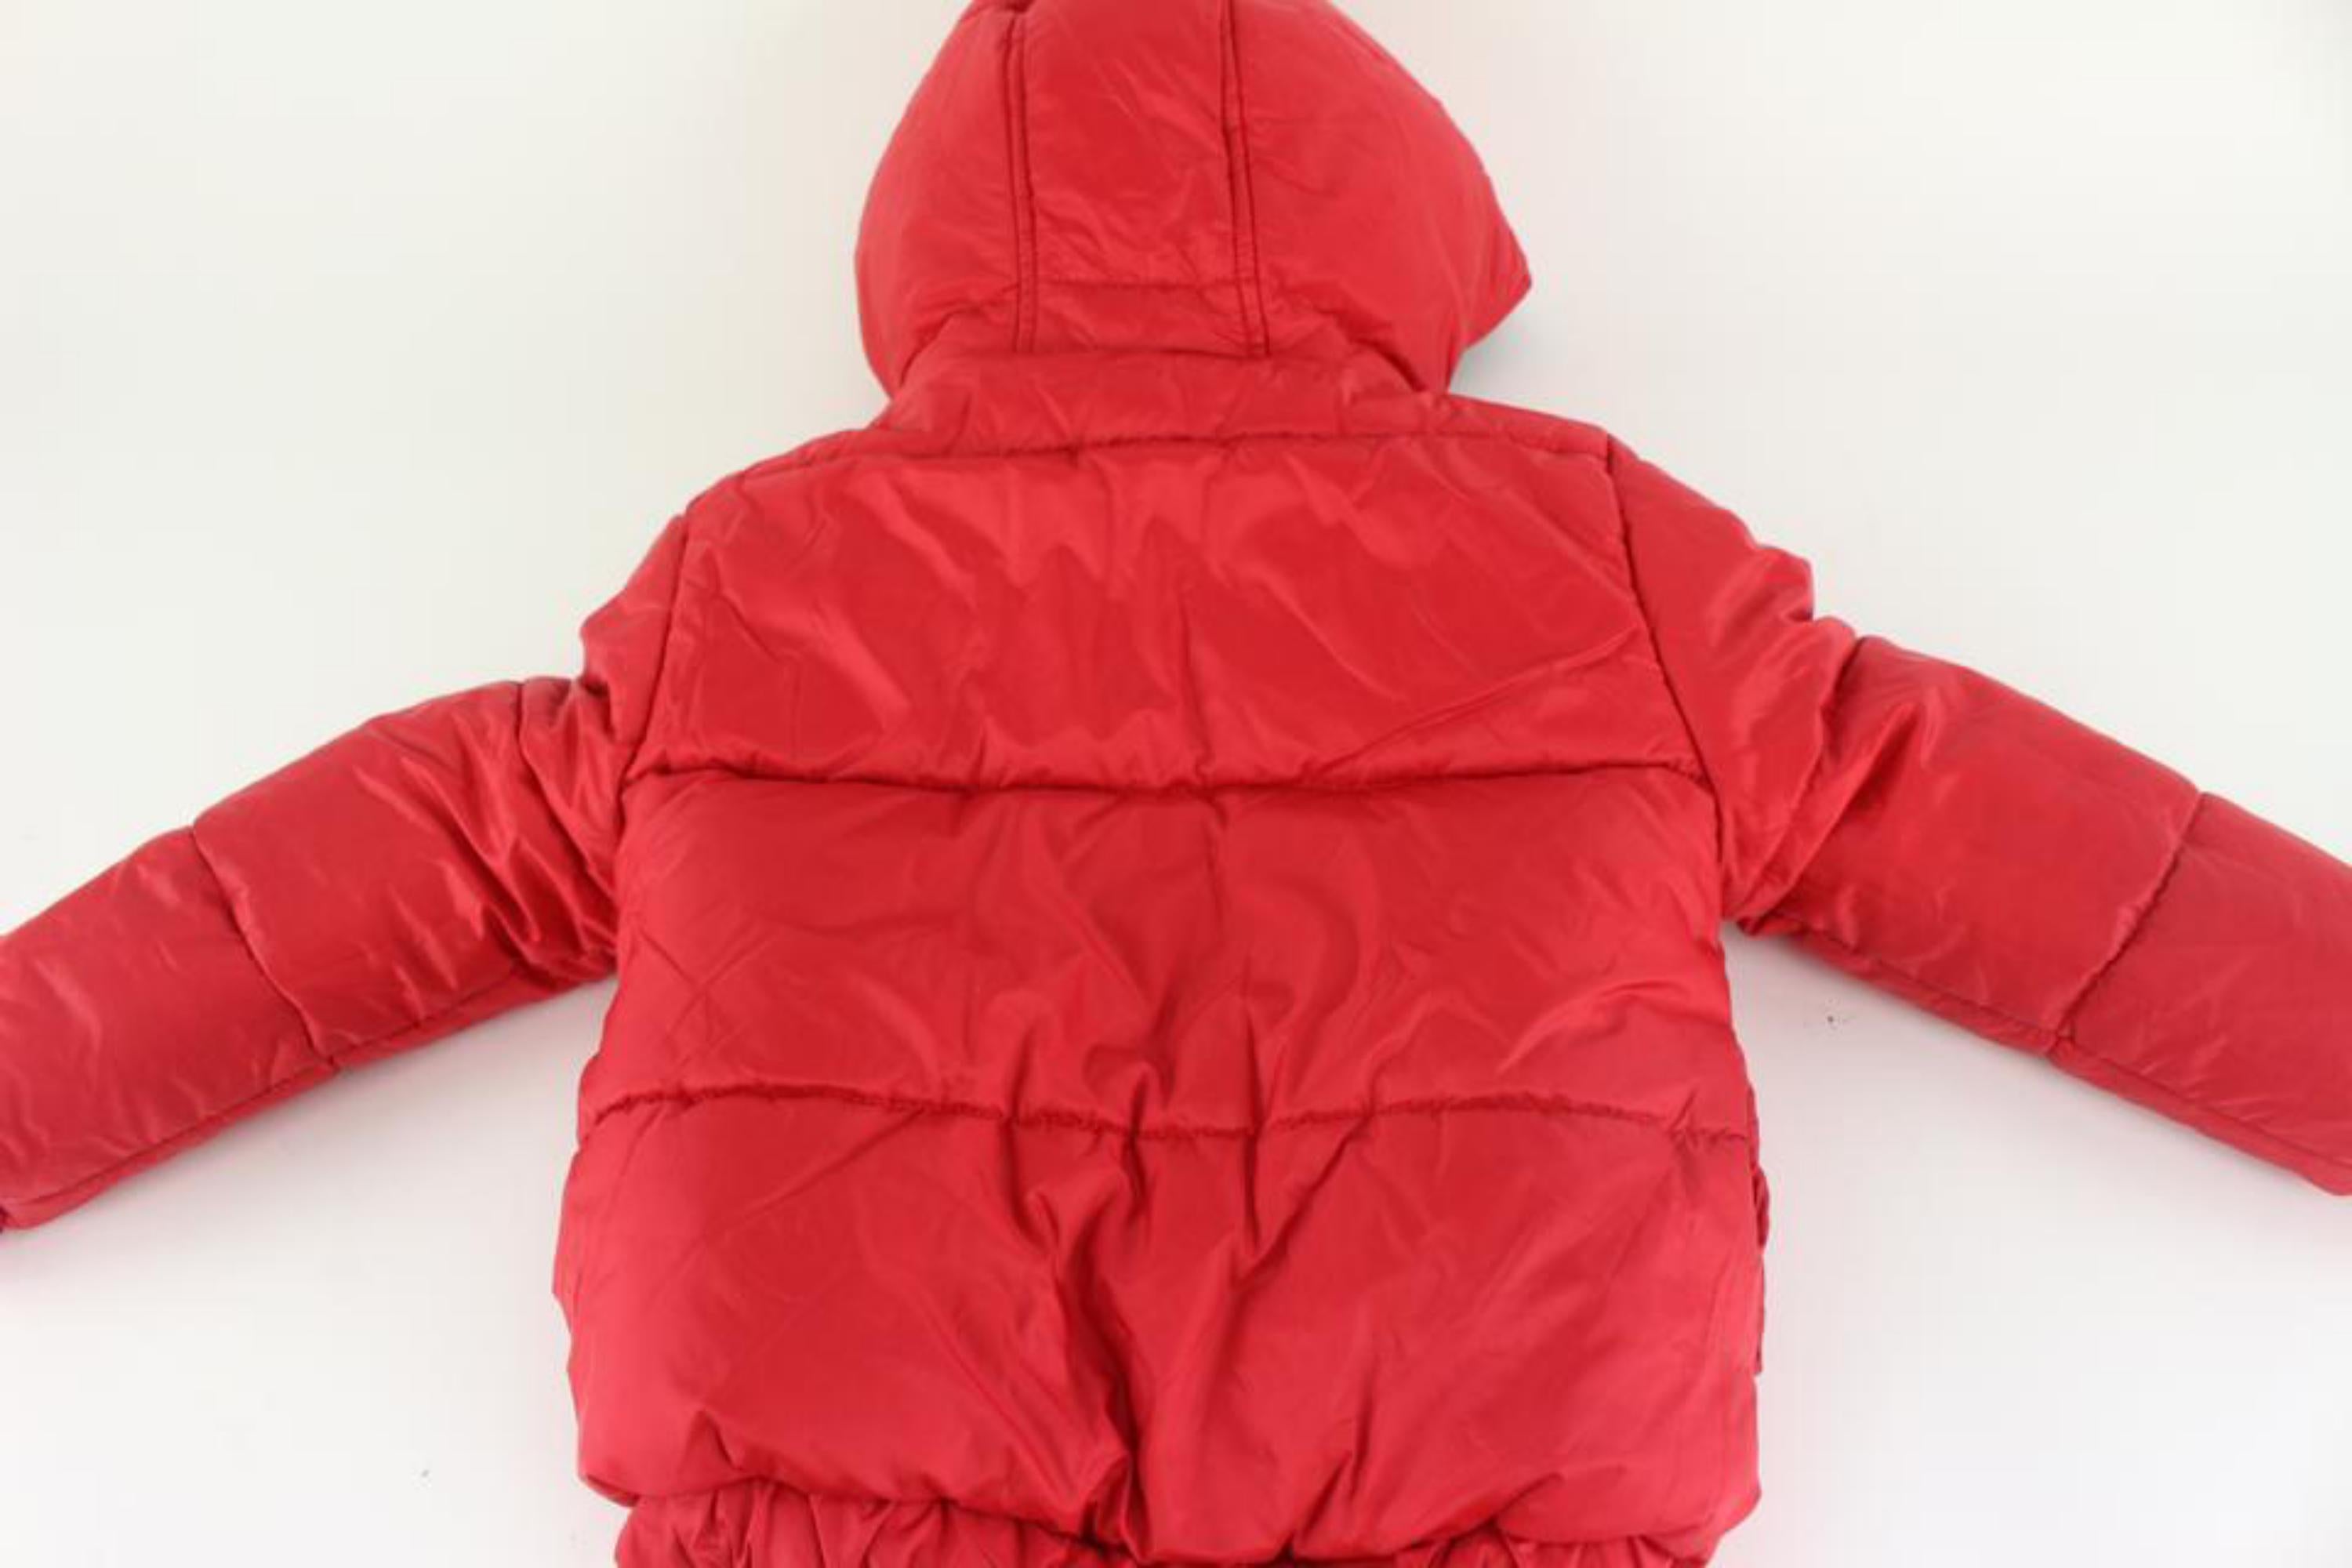 Women's Fendi Size 3T Monogram x Red Puffer Coat Puffy Jacket Toddler Kids 1220f32 For Sale